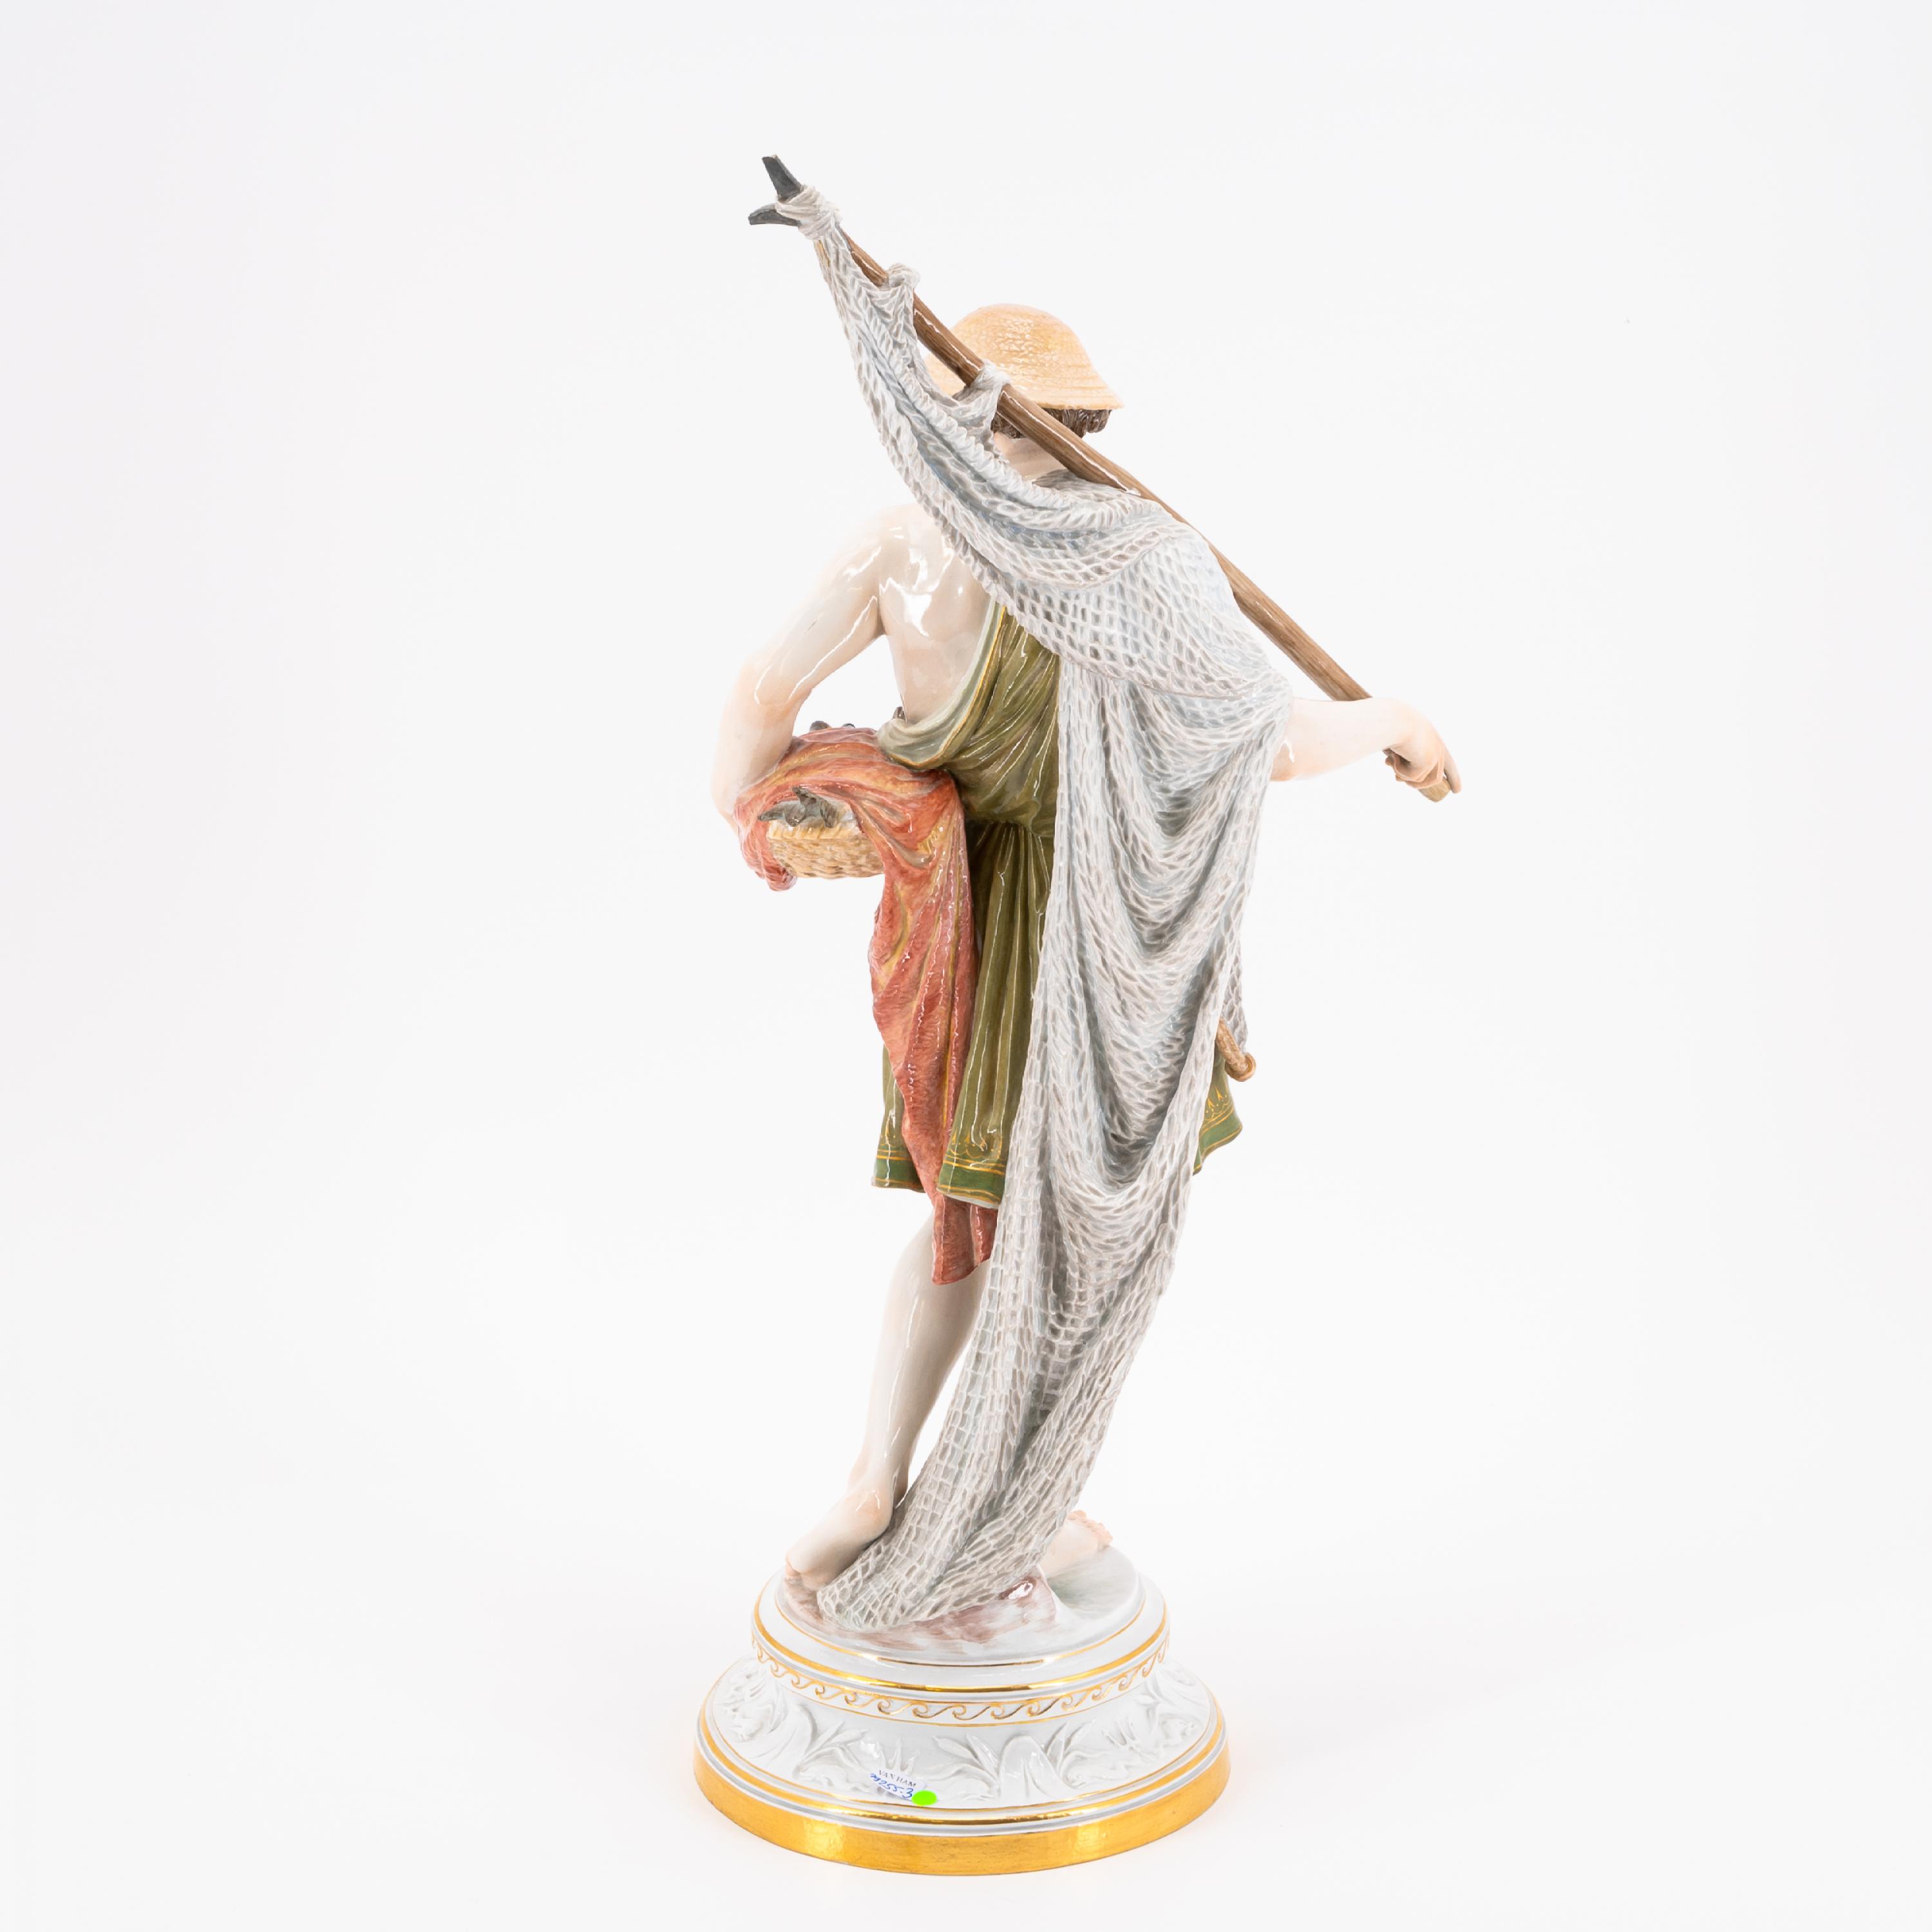 LARGE PORCELAIN FIGURINE OF A FISHER - Image 4 of 6